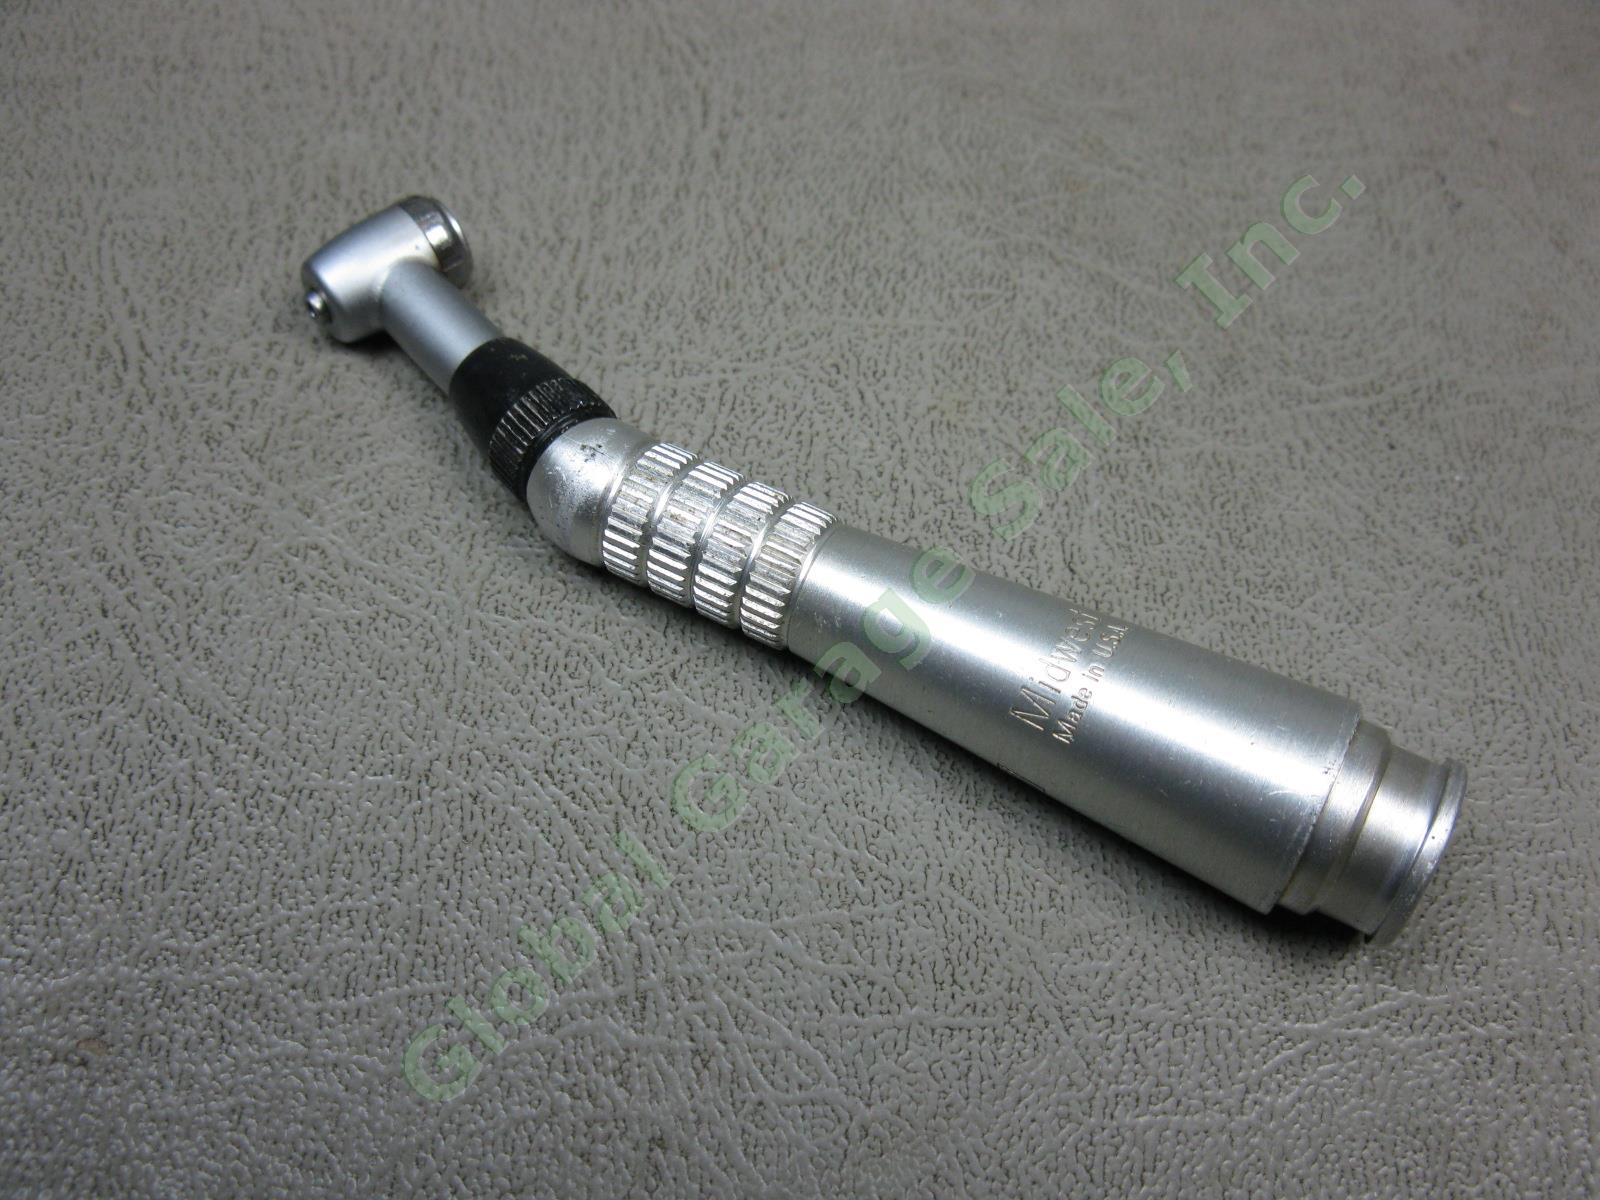 Midwest Low Slow Speed Push Button Contra Angle Dental Handpiece For FG Burs NR!